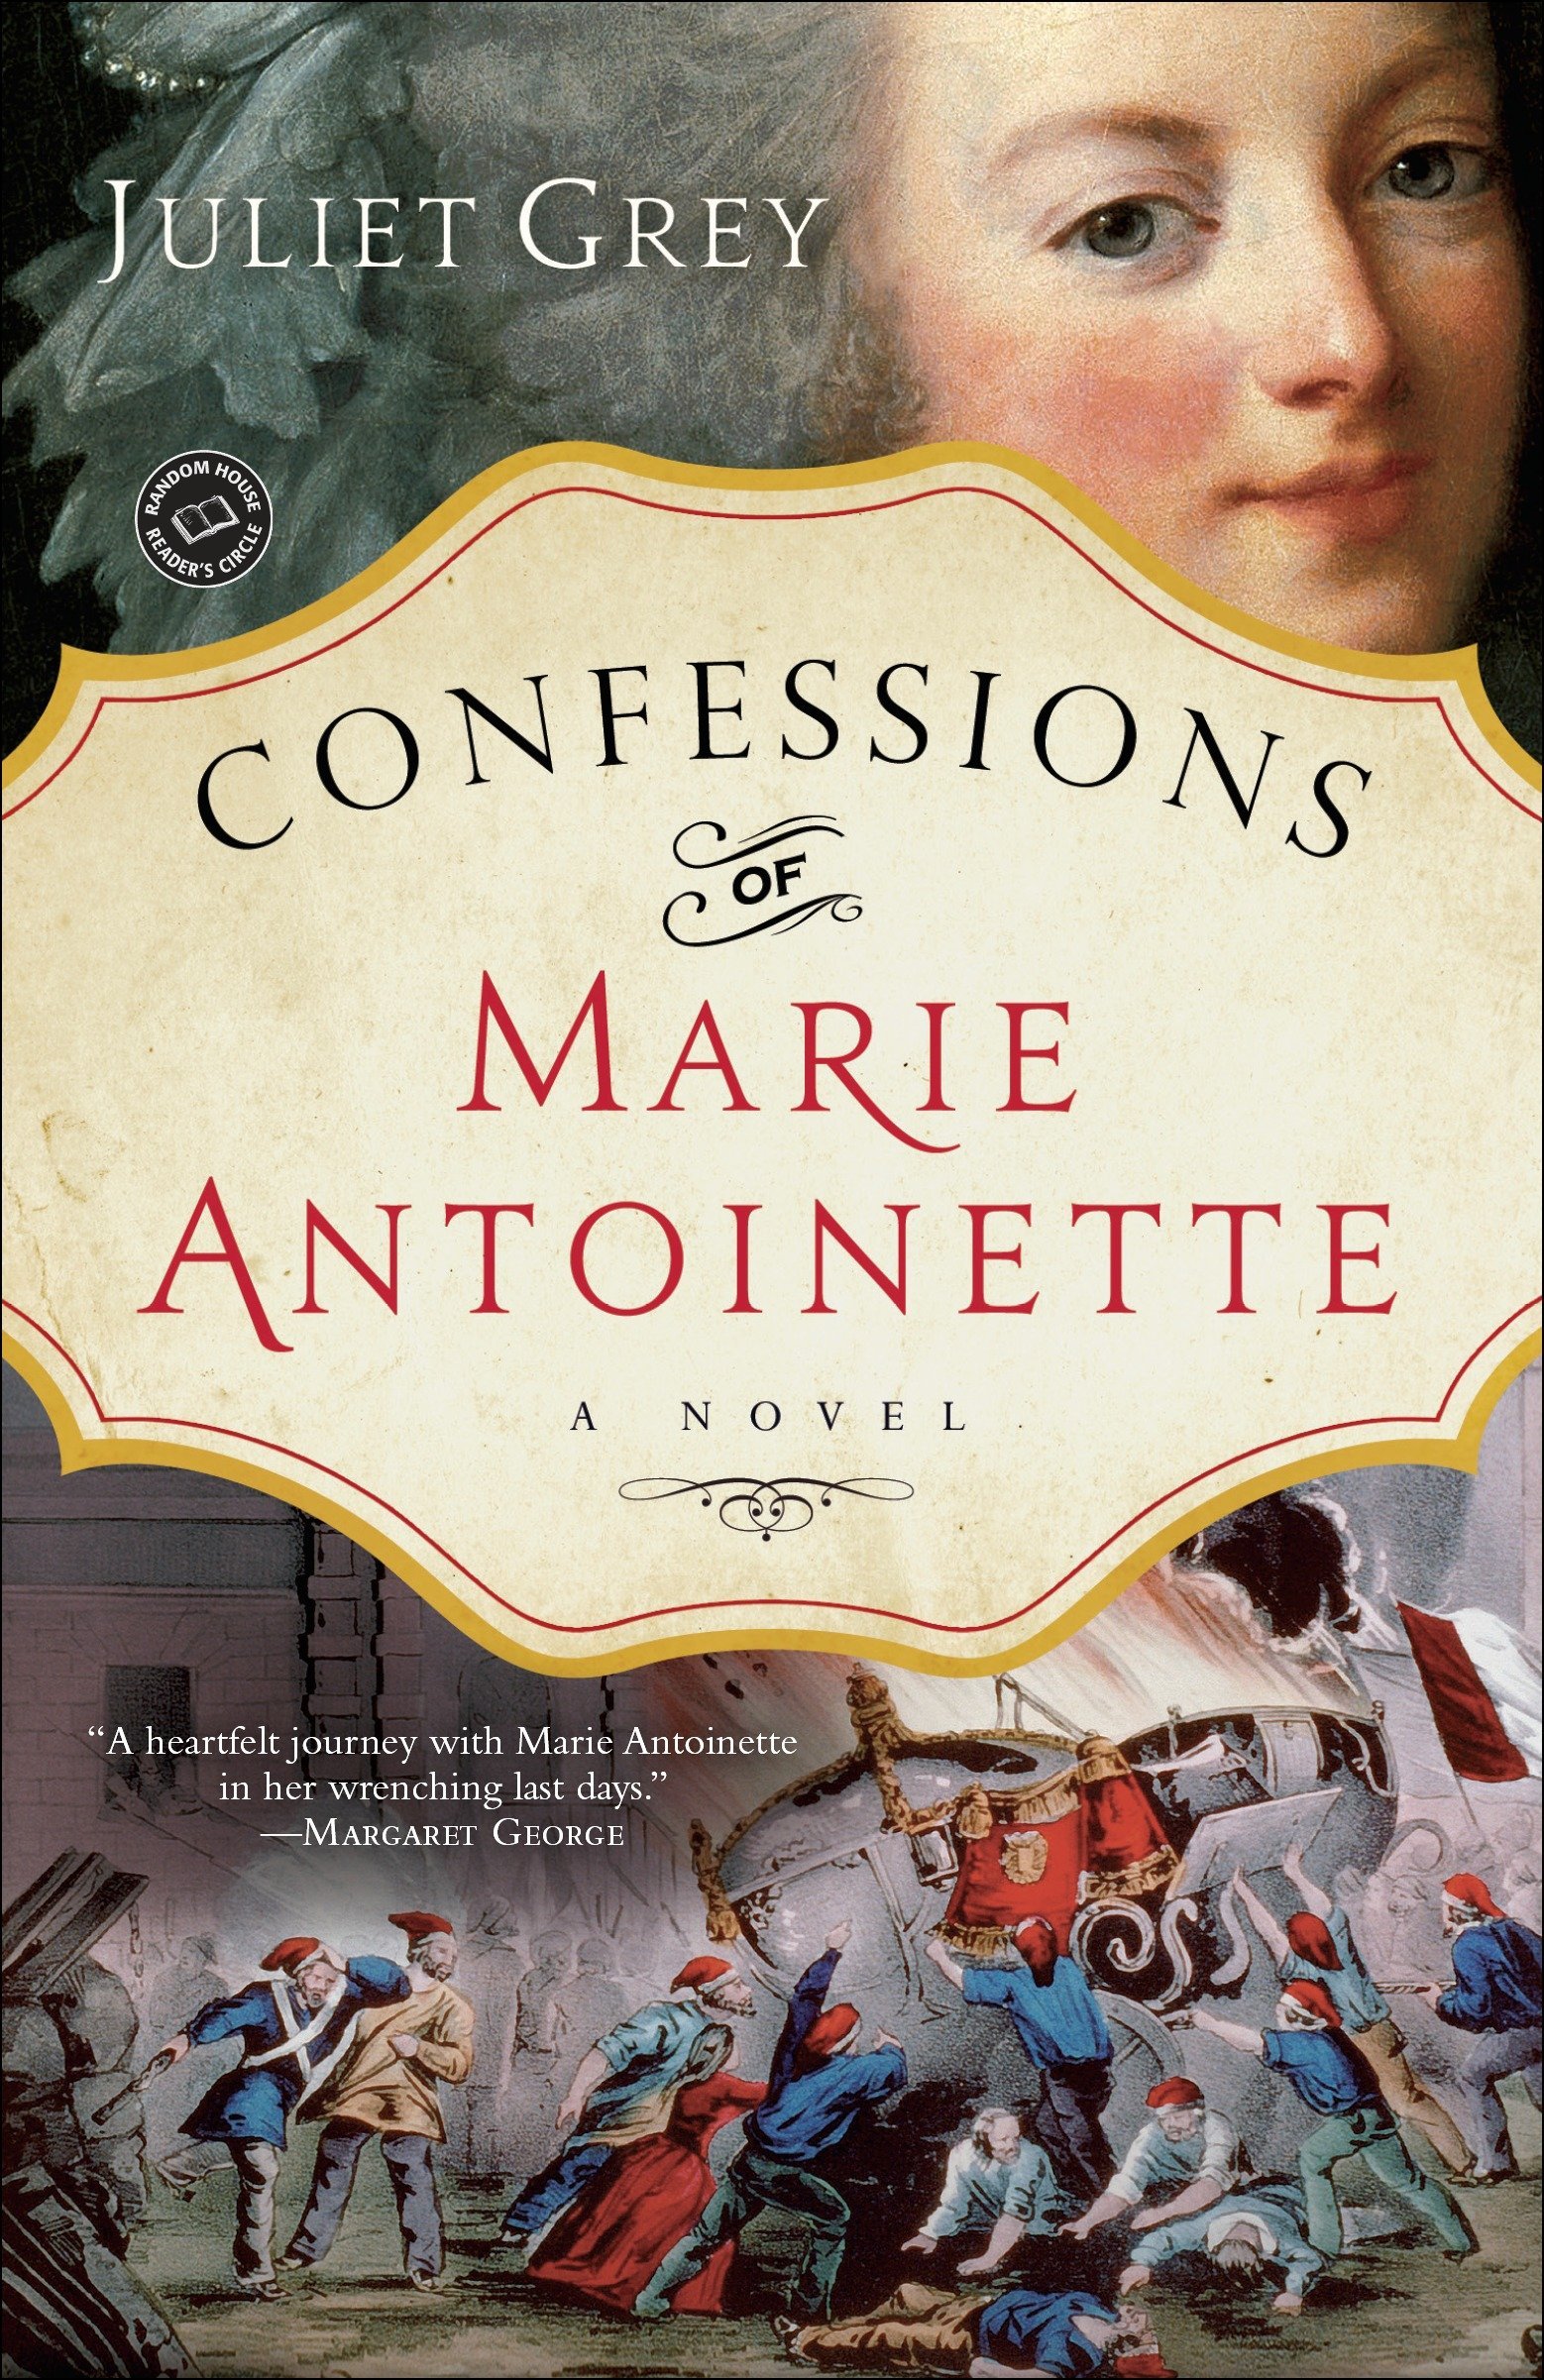 Confessions of Marie Antoinette: A Novel